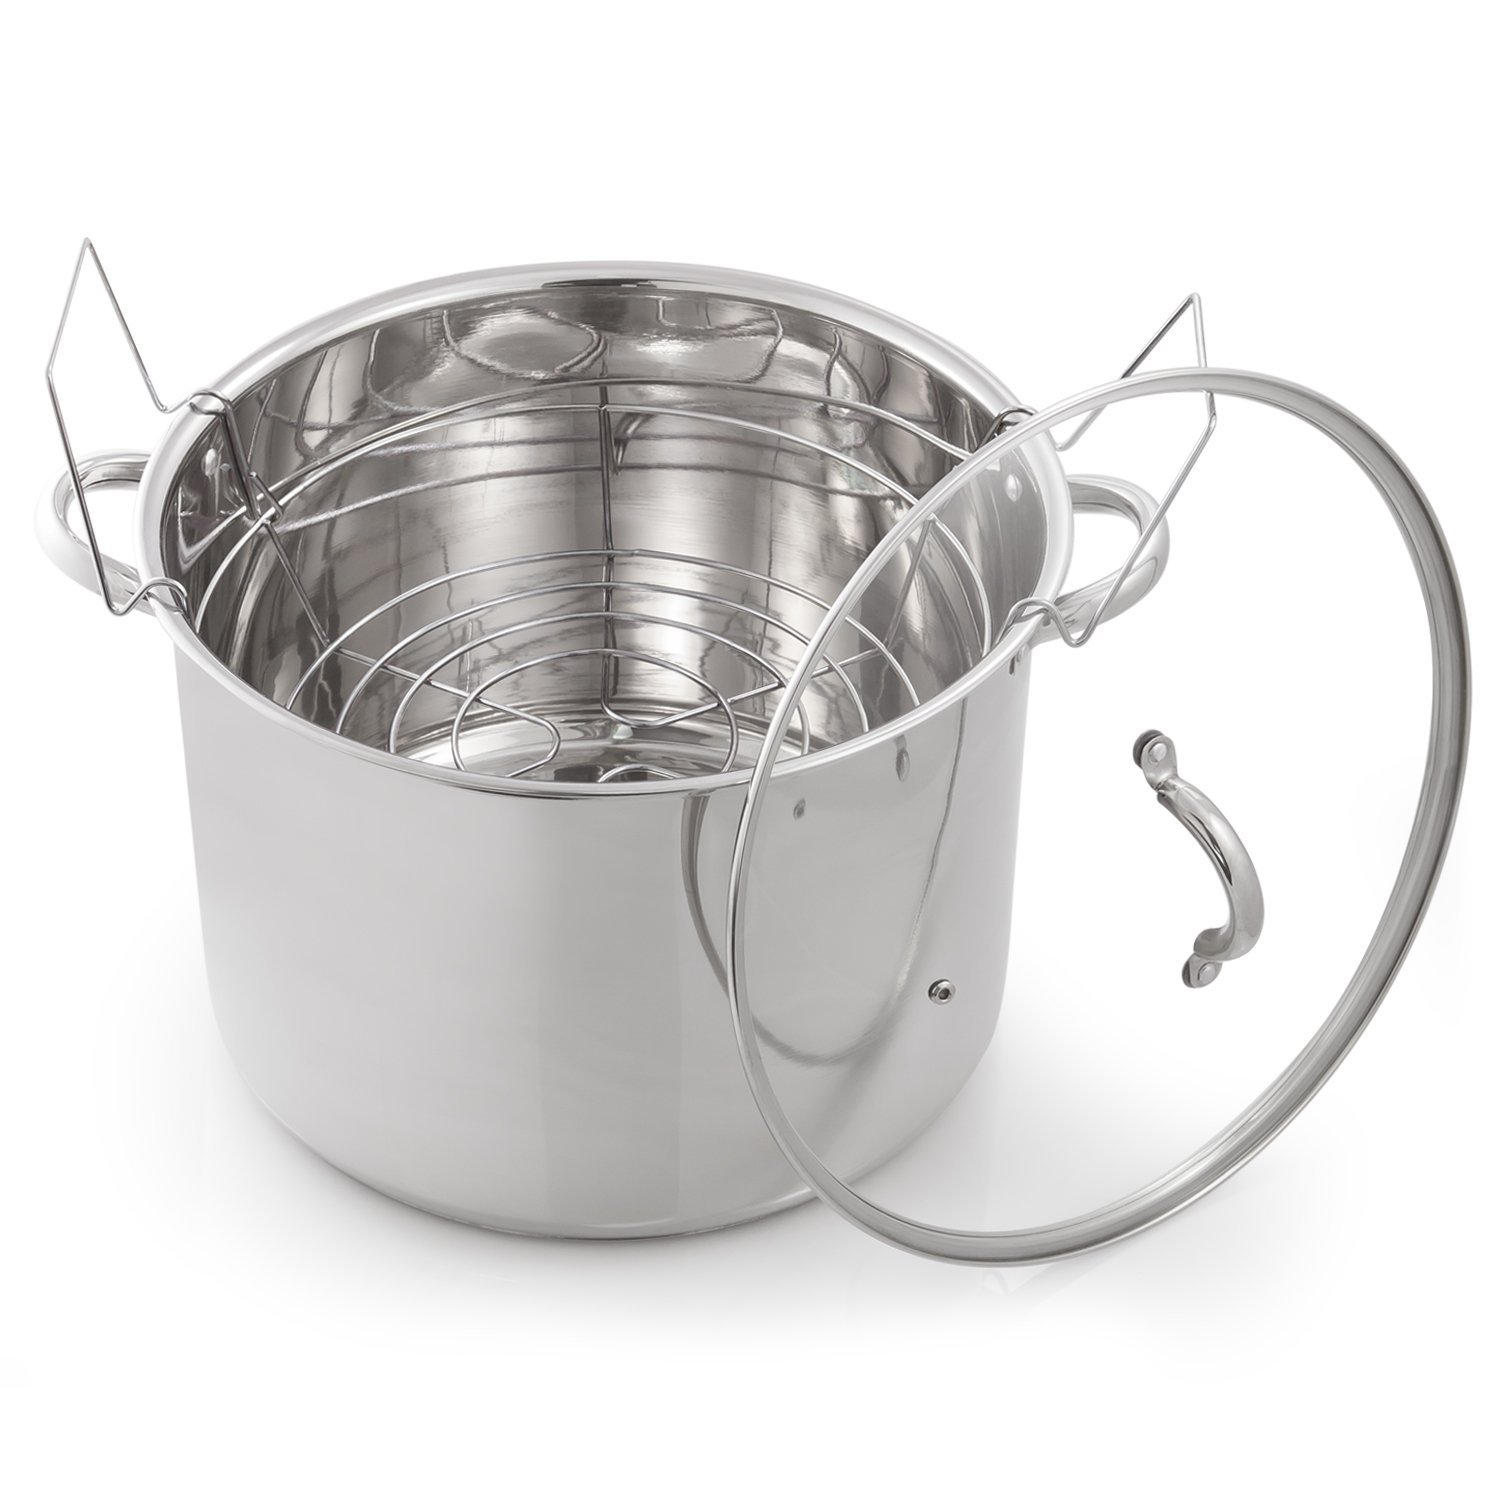 McSunley Stainless Steel Prep N Cook Water Bath Canner